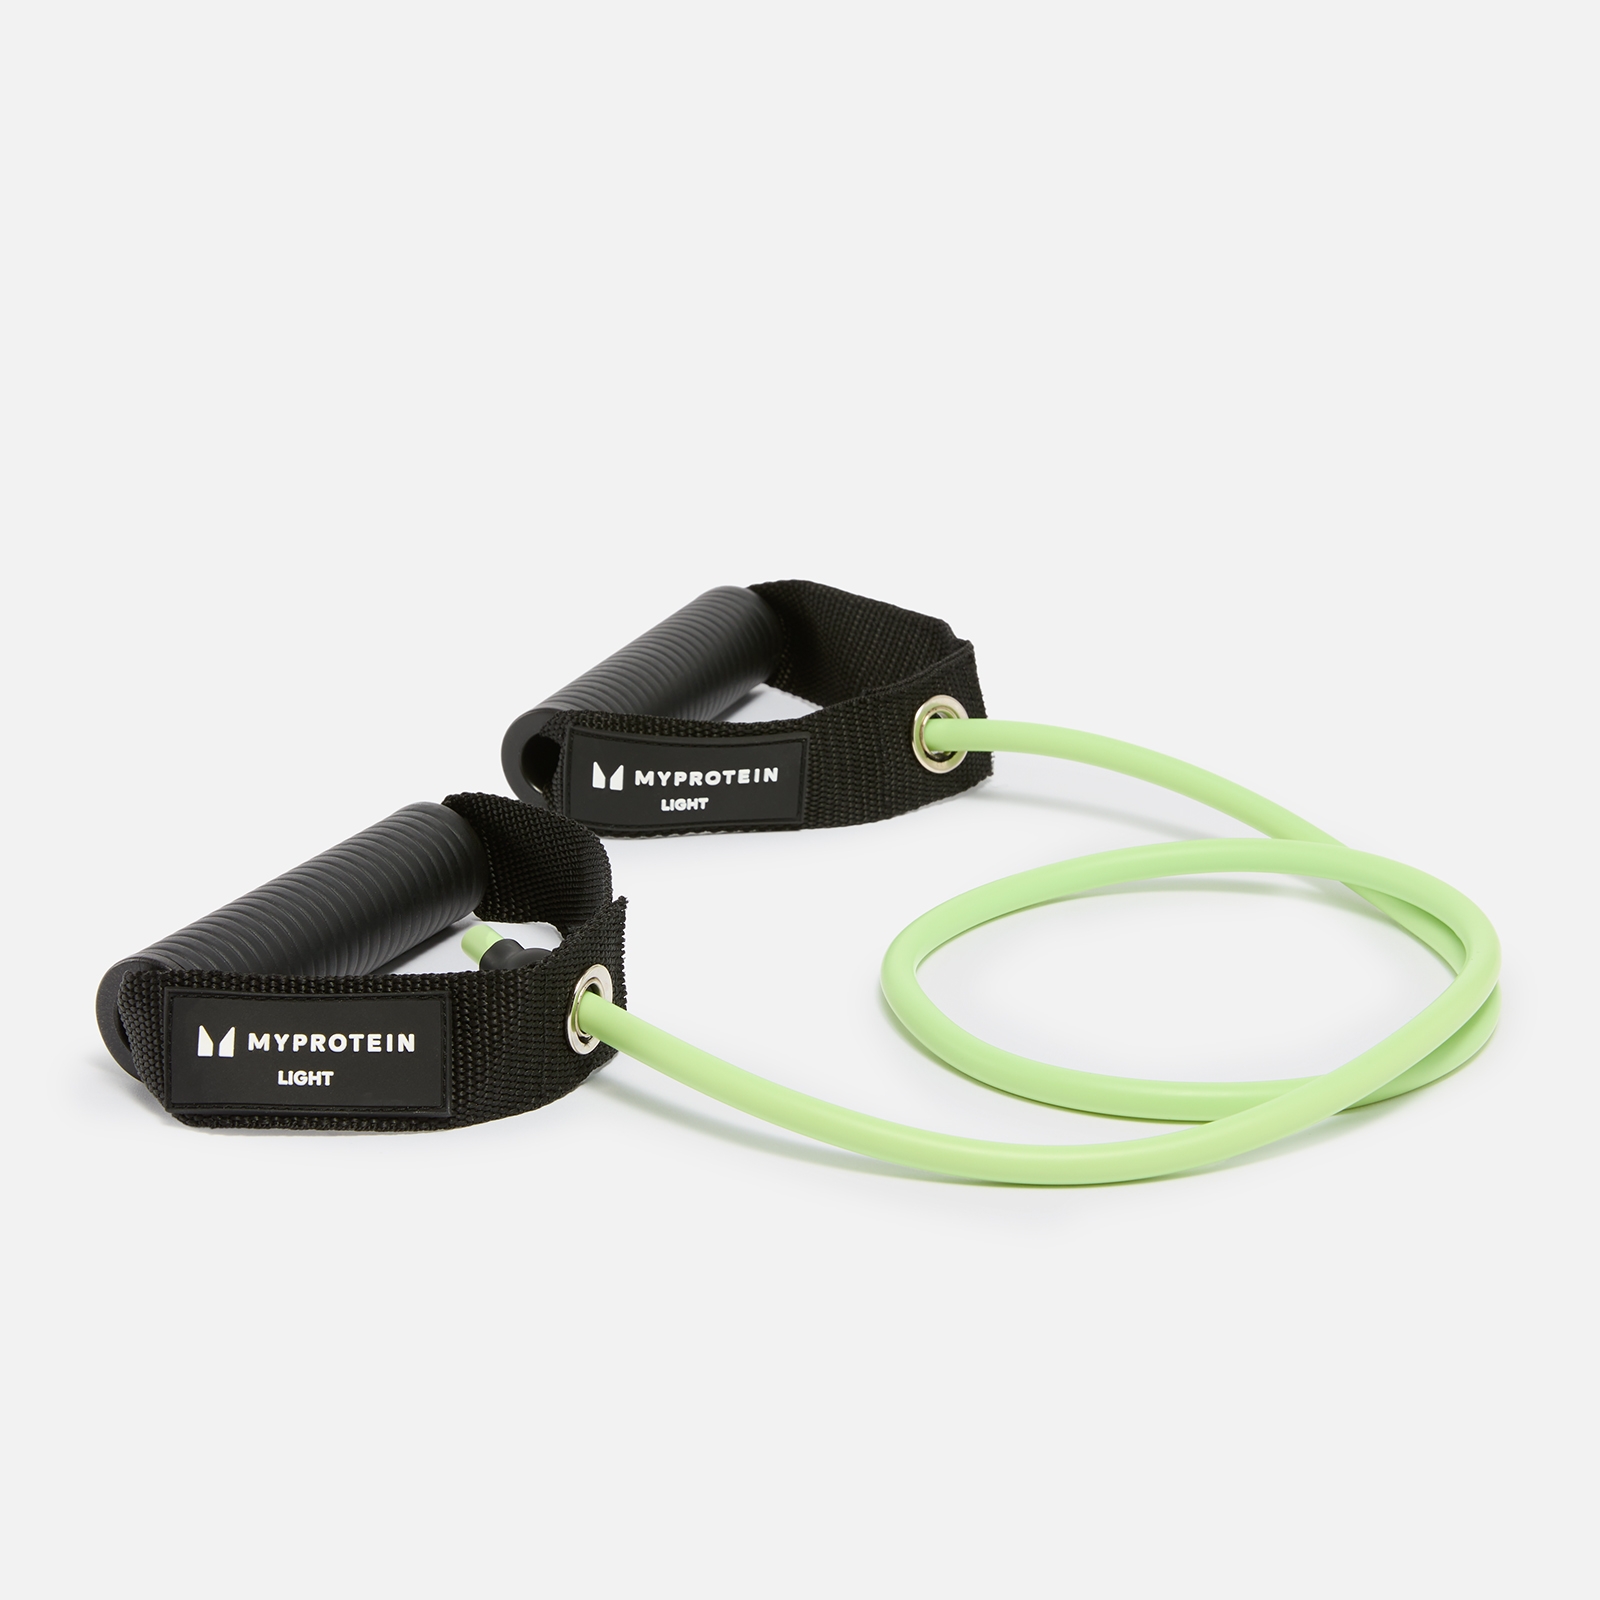 Myprotein Resistance Band With Handles - Light - Mint